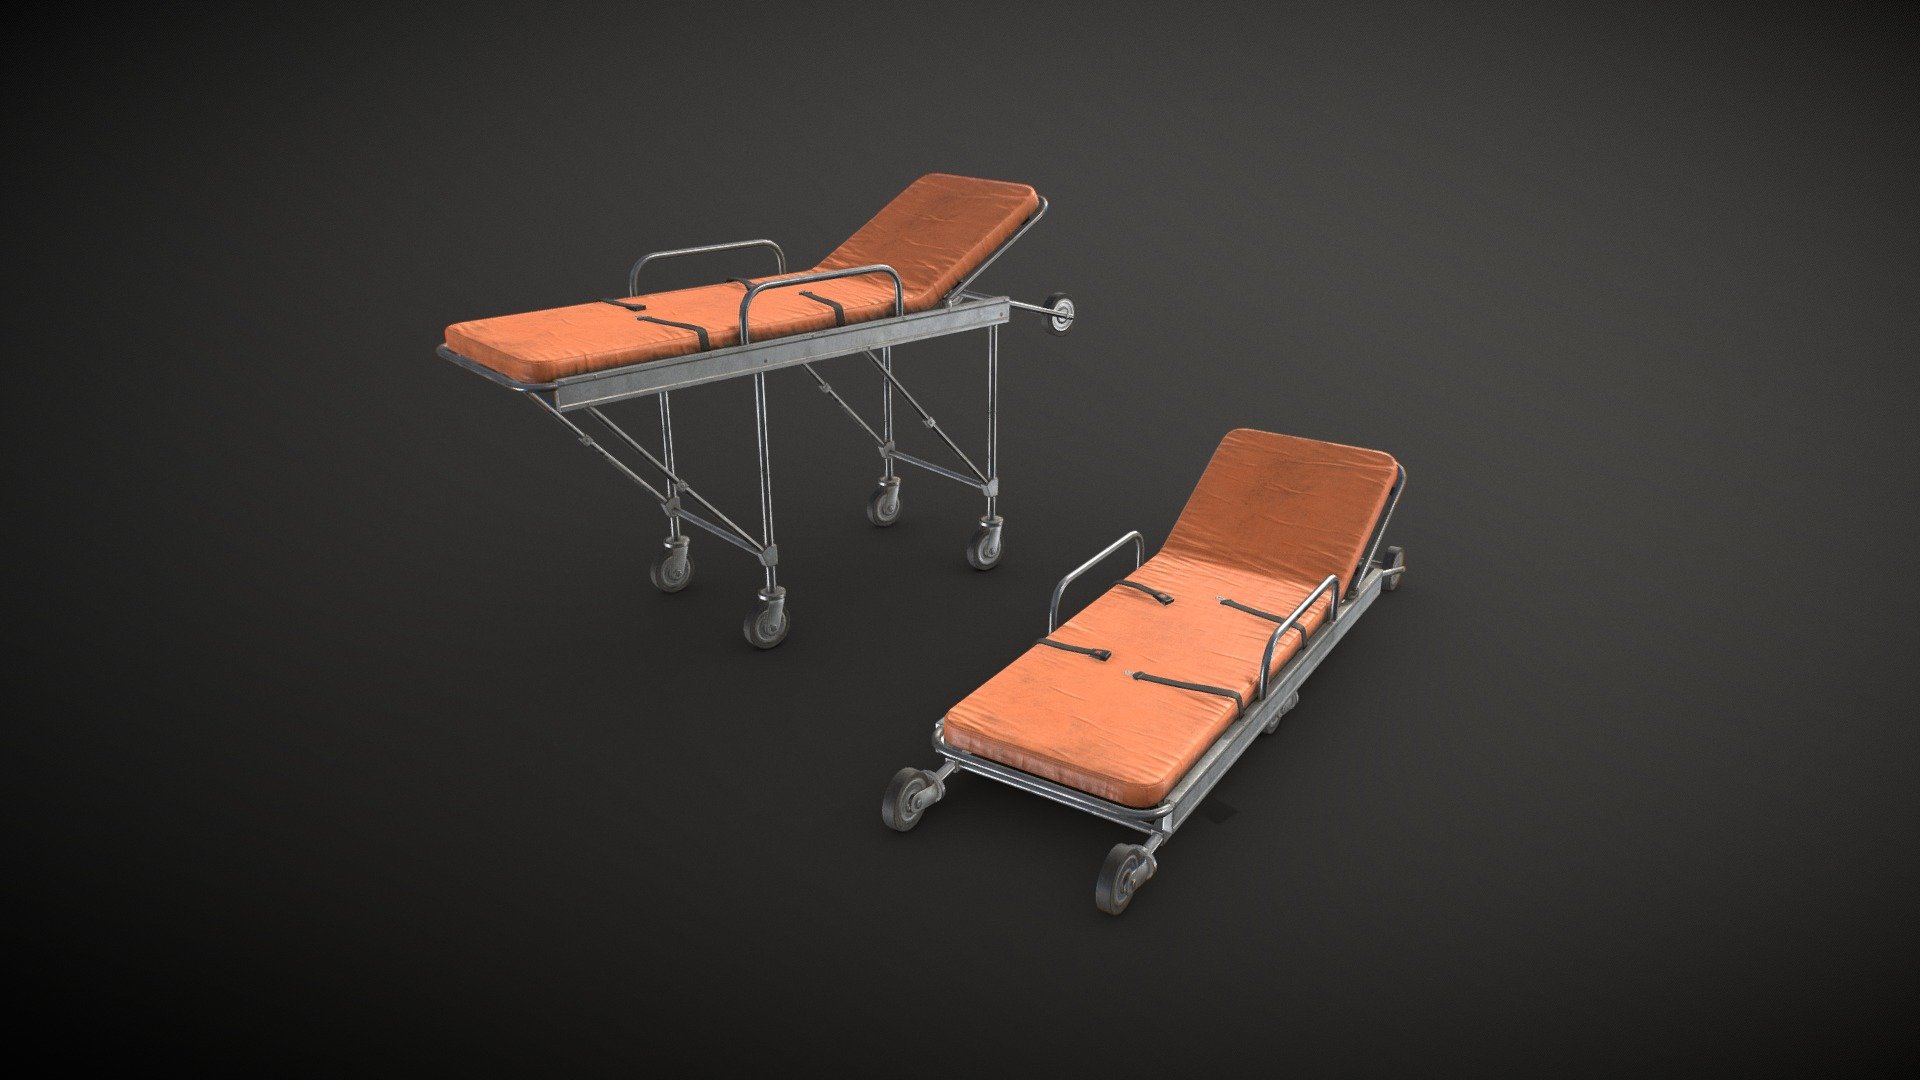 Low Poly 3D model of an Ambulance Stretcher:

The model is gameready and includes 2 versions (open and folded) to use on street or in ambulance:


Real-world scale and centered.
The unit of measurement used for the model is centimeters
Approx. dimensions: Lenght - 190cm / Width: 60cm / Height: 120cm   
2 versions included: Open and Folded (model is not rigged)
PBR textures made in Substance Painter
Second uv channel included for lightmaps.
Packed ORM textures included for Unreal.
Approx. average texel density: 1147 px/m

Polys: 1.682 (3.344 tris)

Maps size:  2048x2048

Provided Maps:


Albedo
Normal
Roughness
Metalness
AO
ORM

Formats Incuded - MAX / BLEND / OBJ / FBX 

This model can be used for any game, film, personal project, etc. You may not resell or redistribute any content - Ambulance Stretcher - Low Poly - Buy Royalty Free 3D model by MSWoodvine 3d model